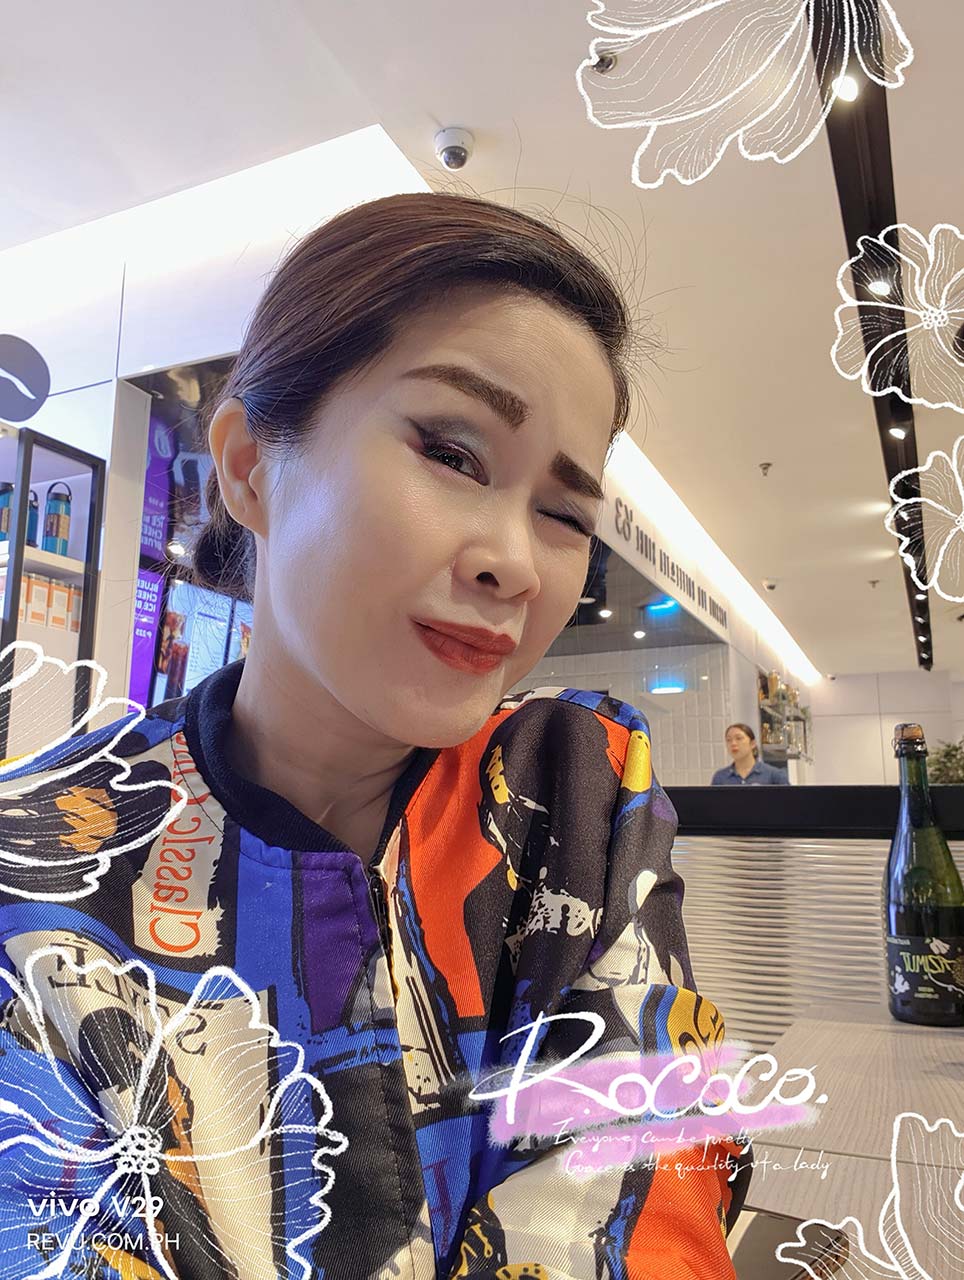 vivo-V29-5G-camera-sample-selfie-picture-in-full-review-by-Revu-Philippines-a